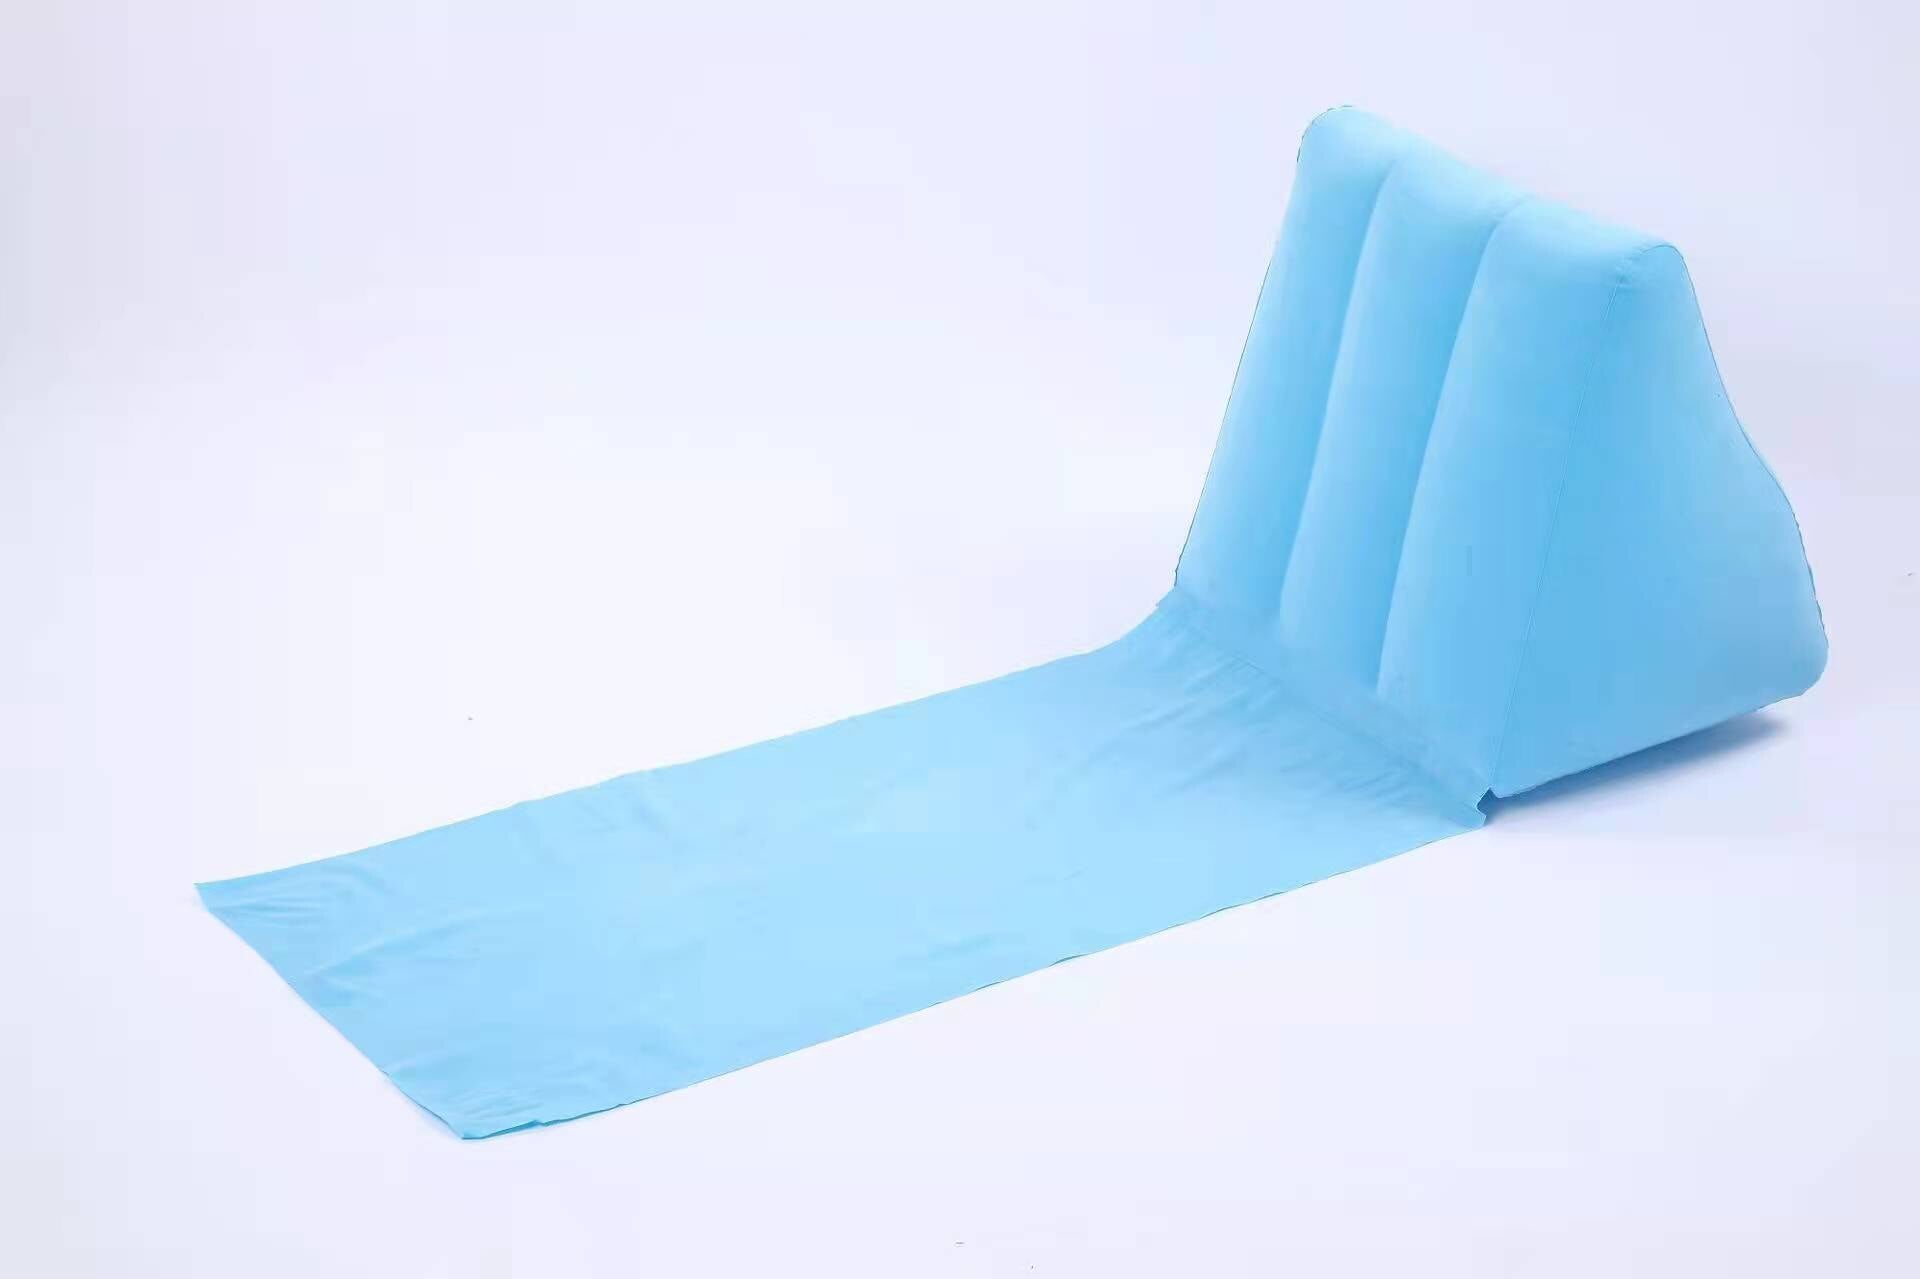 Coussin gonflable plage